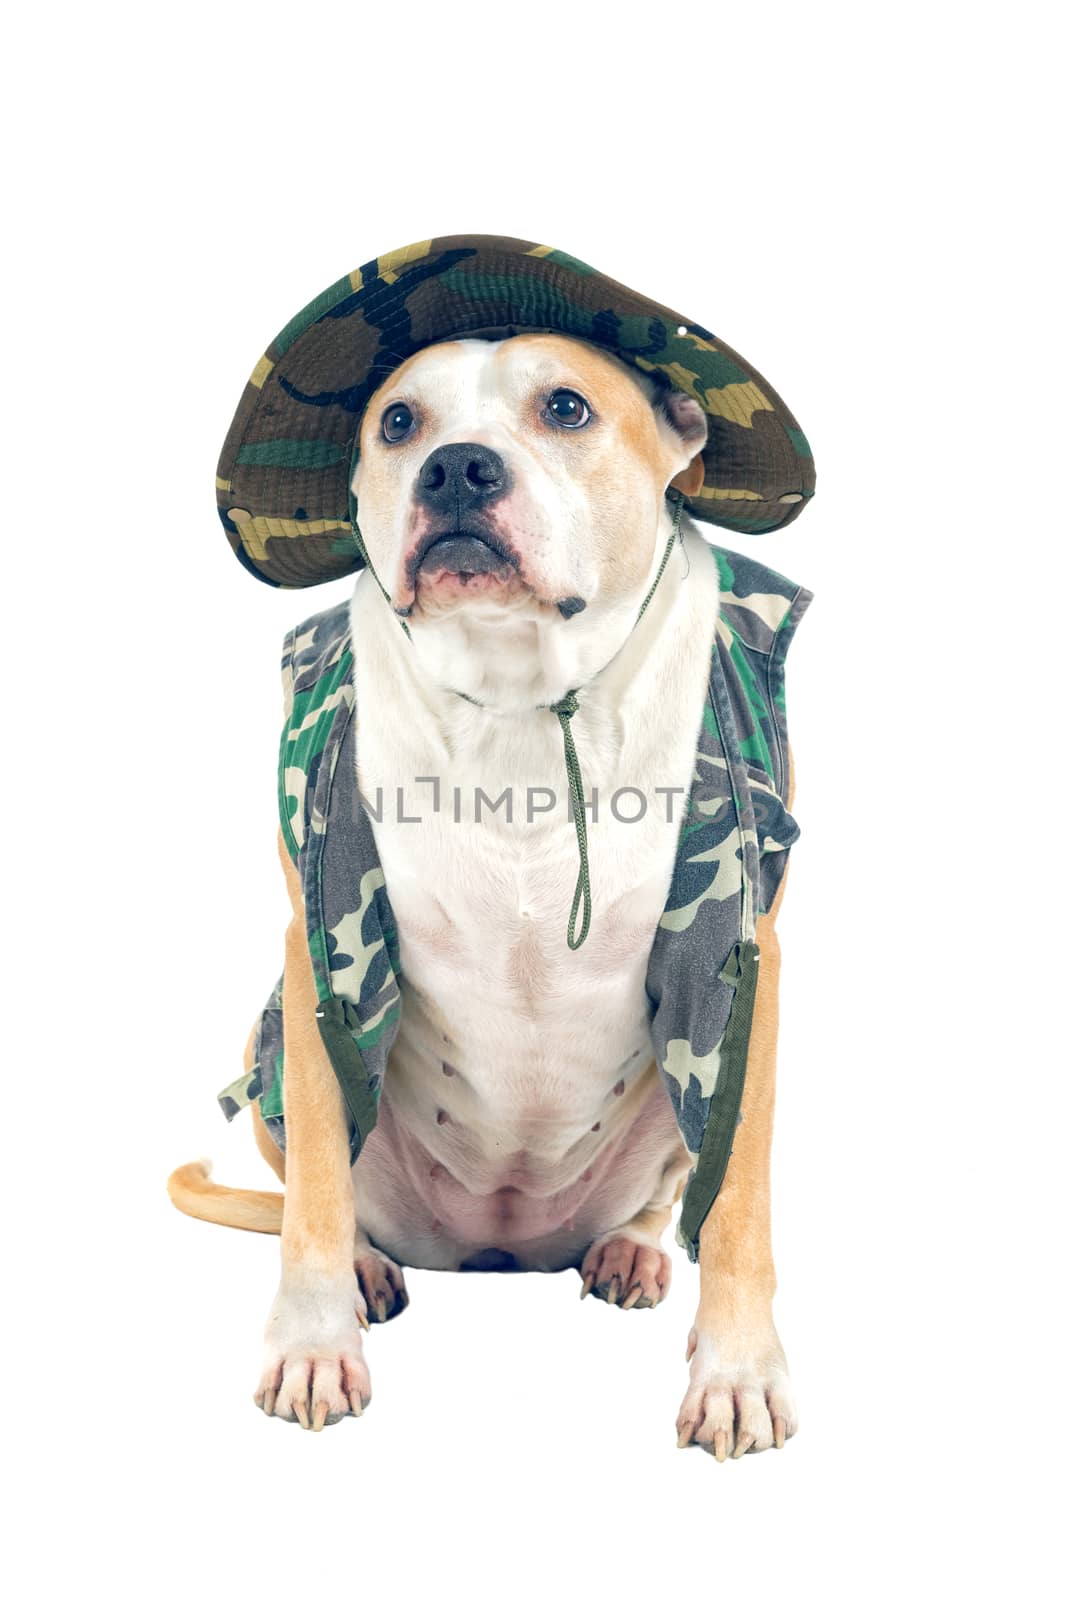 Dog in military attire on a white background by neryx